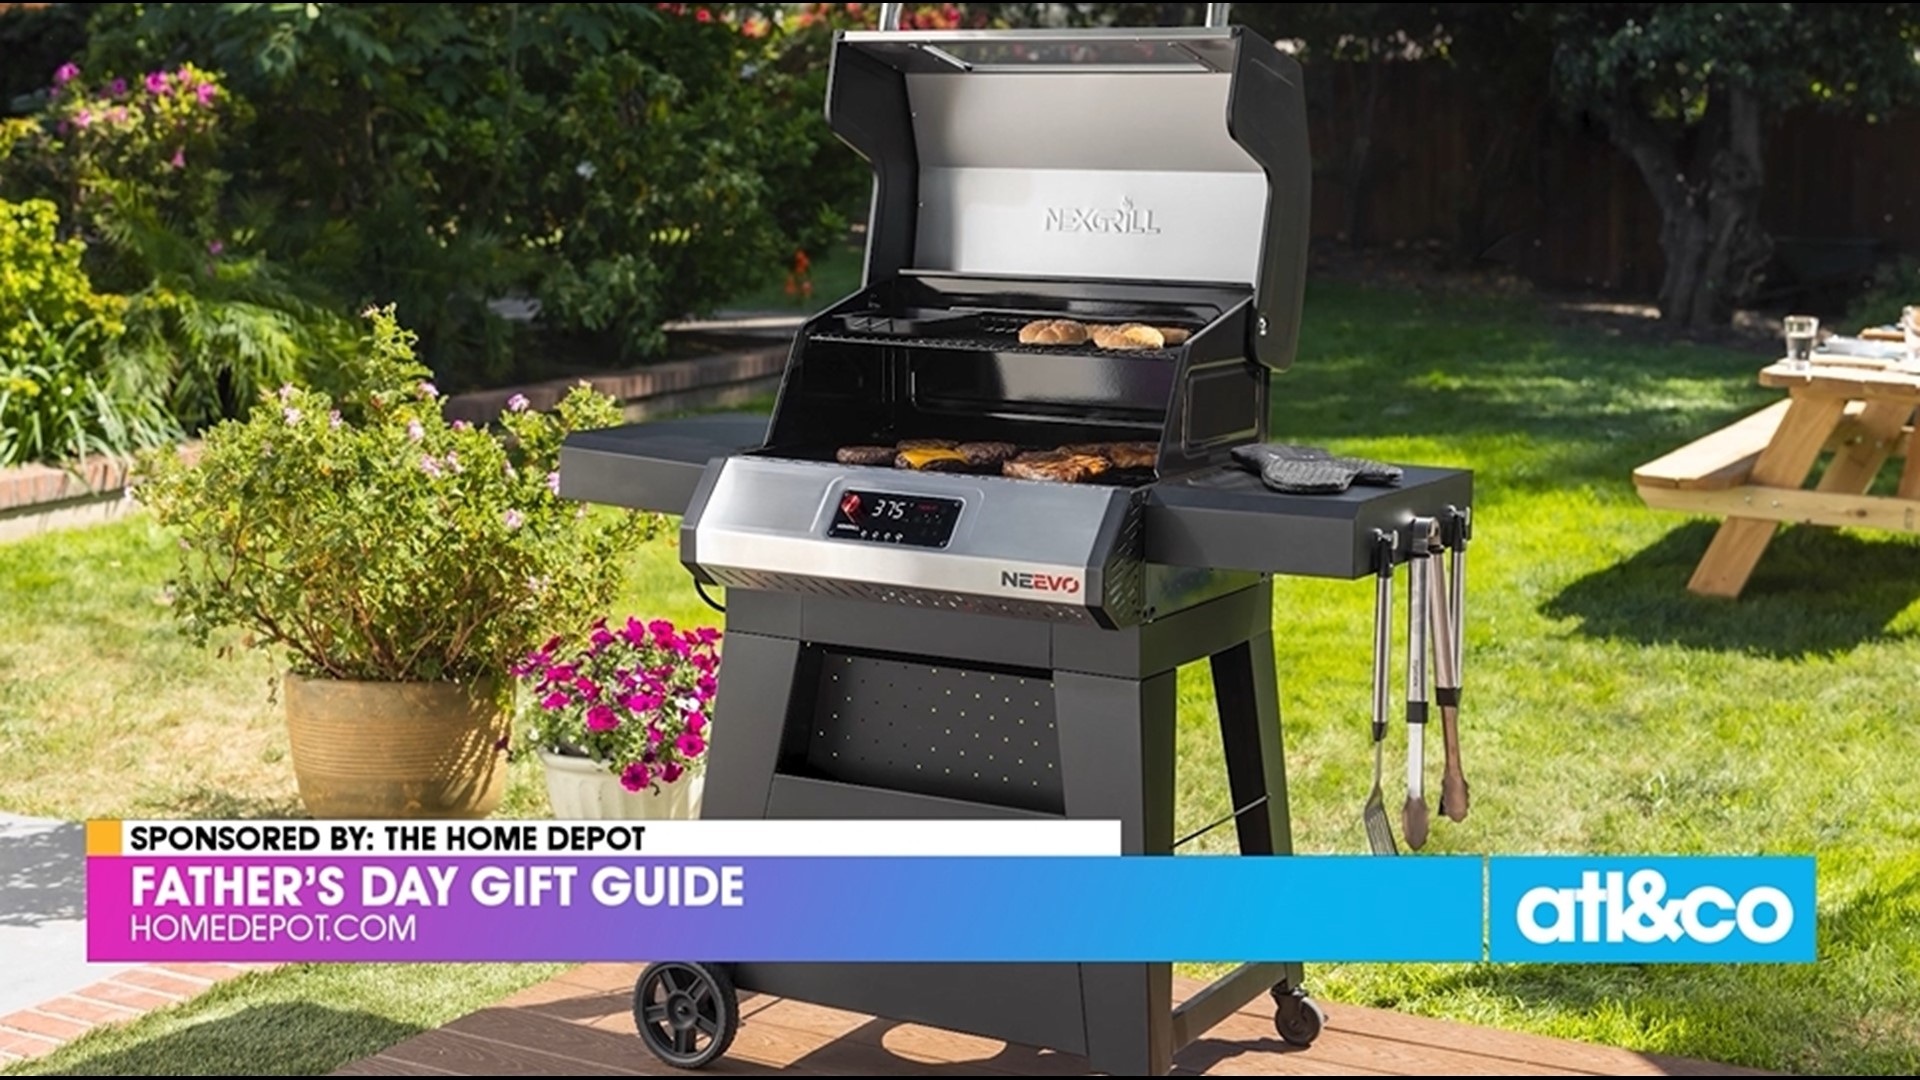 Get Dad the best tools, grills, and gadgets from The Home Depot this Father's Day.